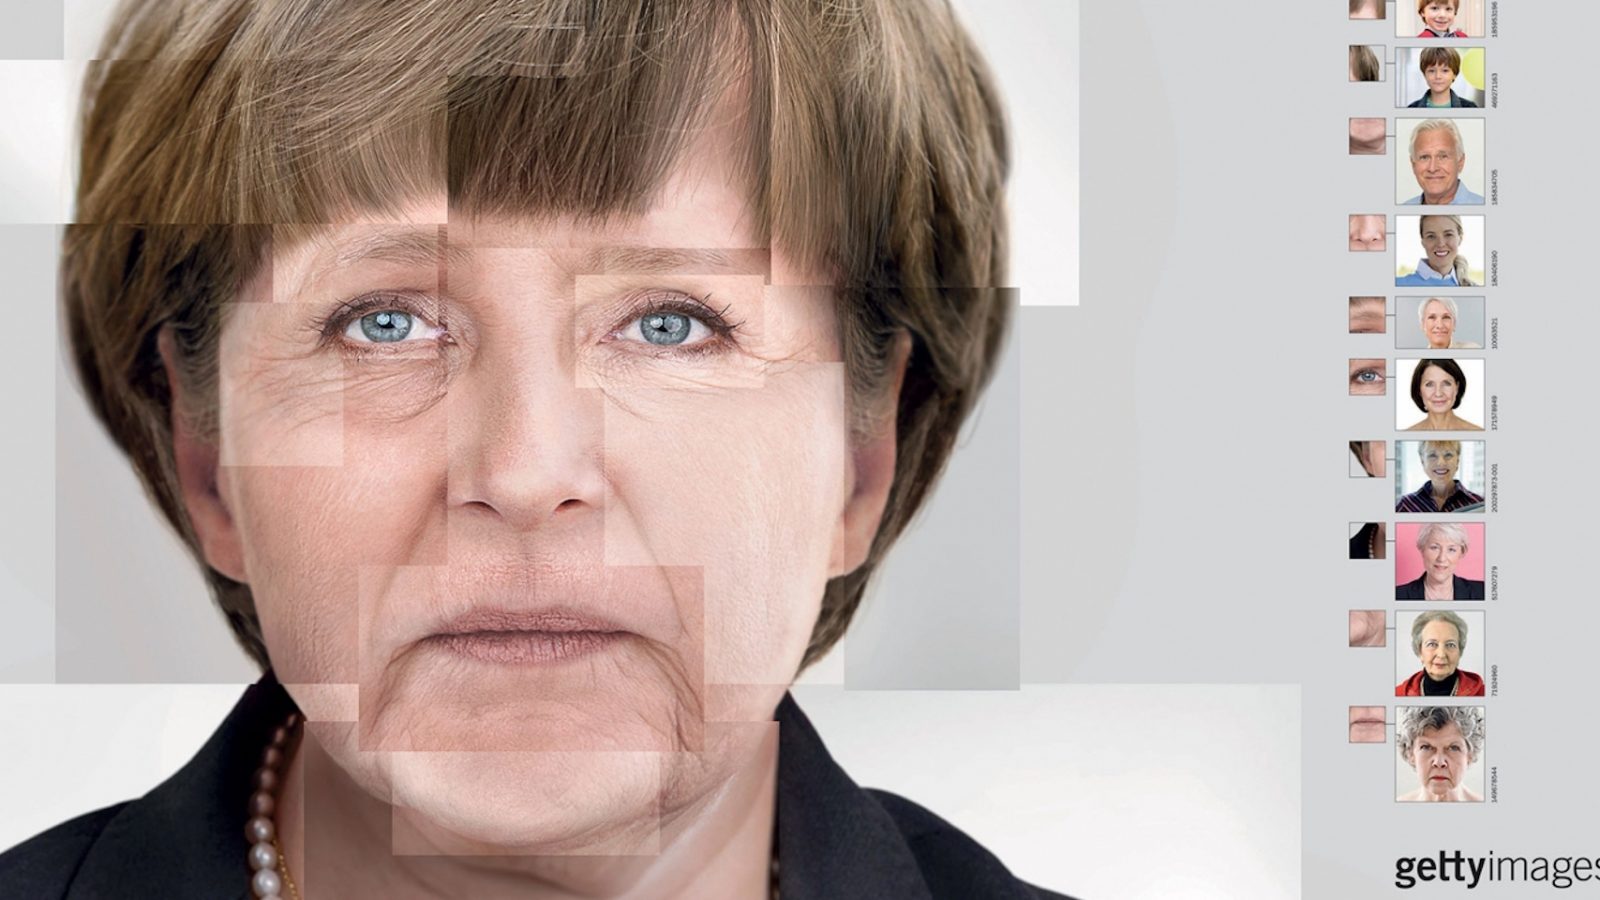 Famous Faces Stiched Together by a Collage of Stock Images